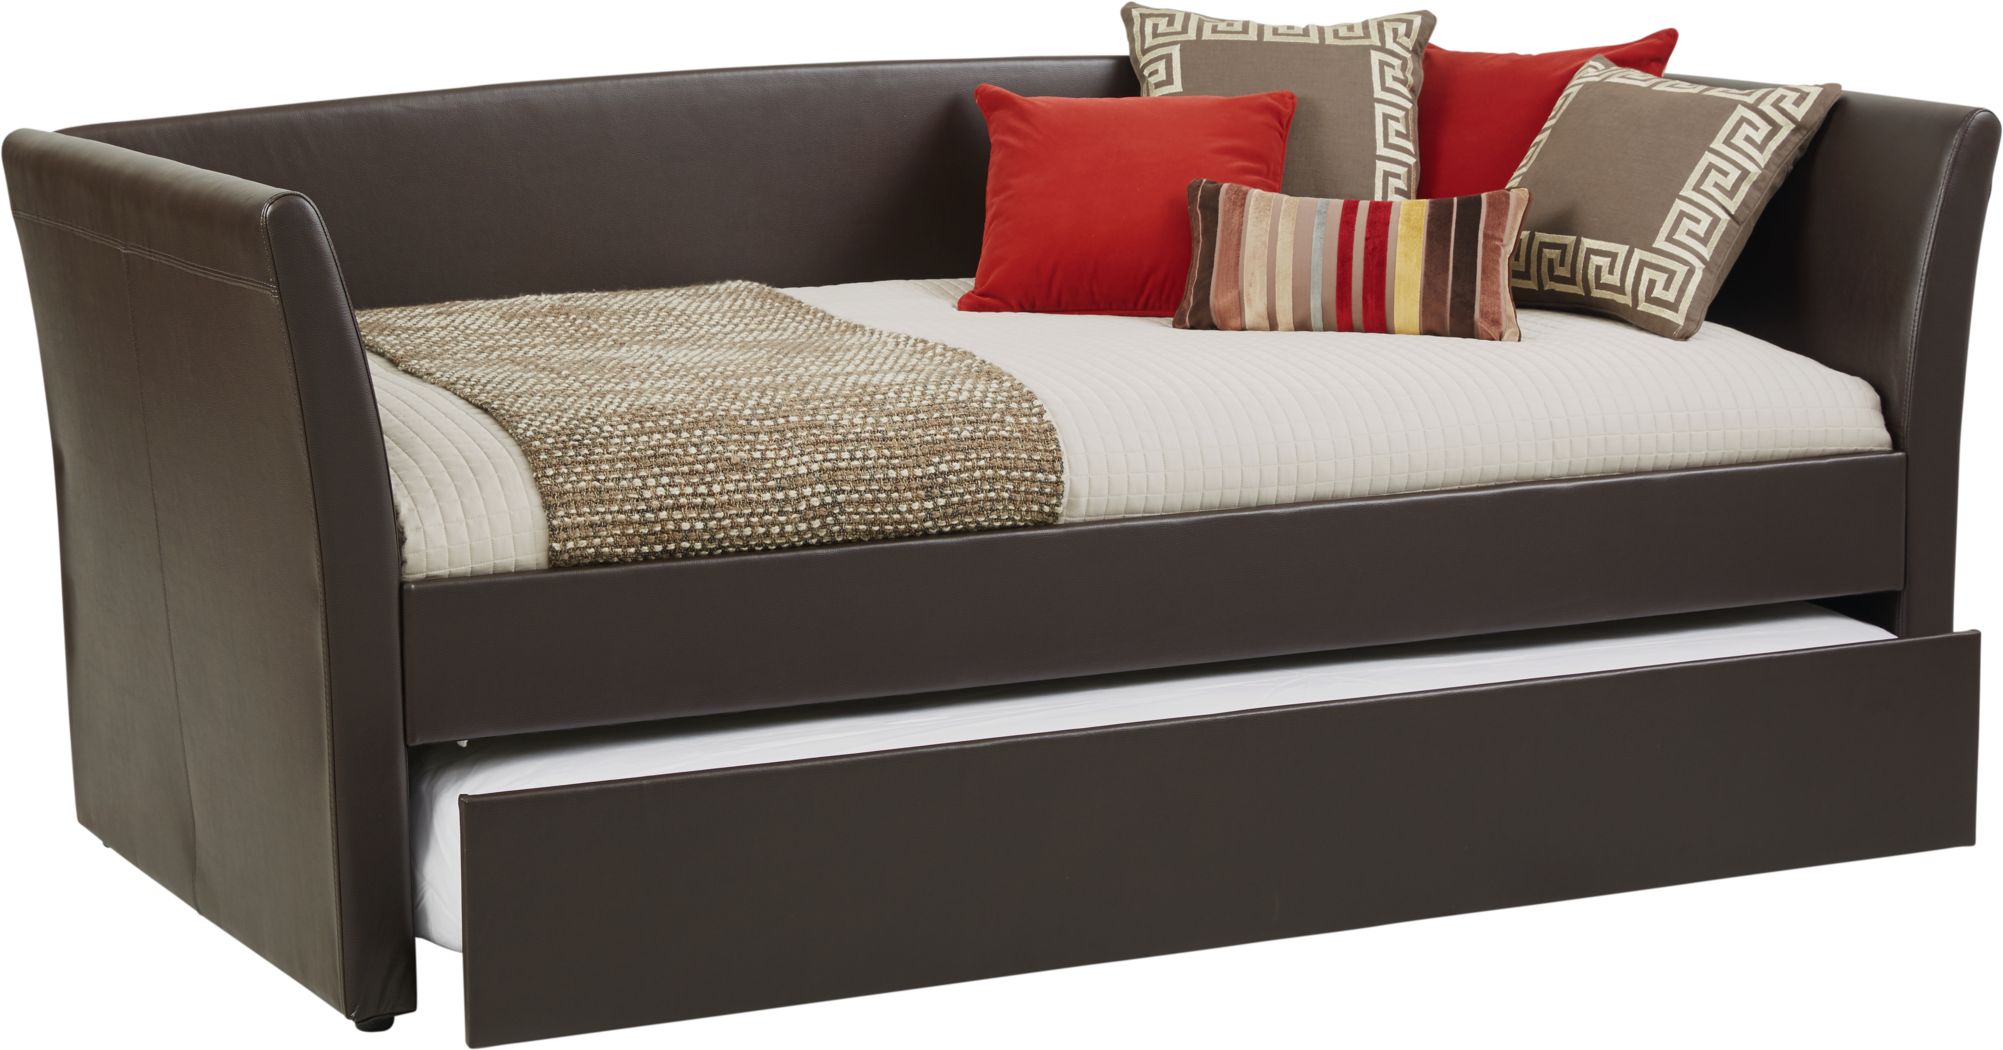 Leather Daybeds With Trundle, Brown Leather Daybed With Trundle